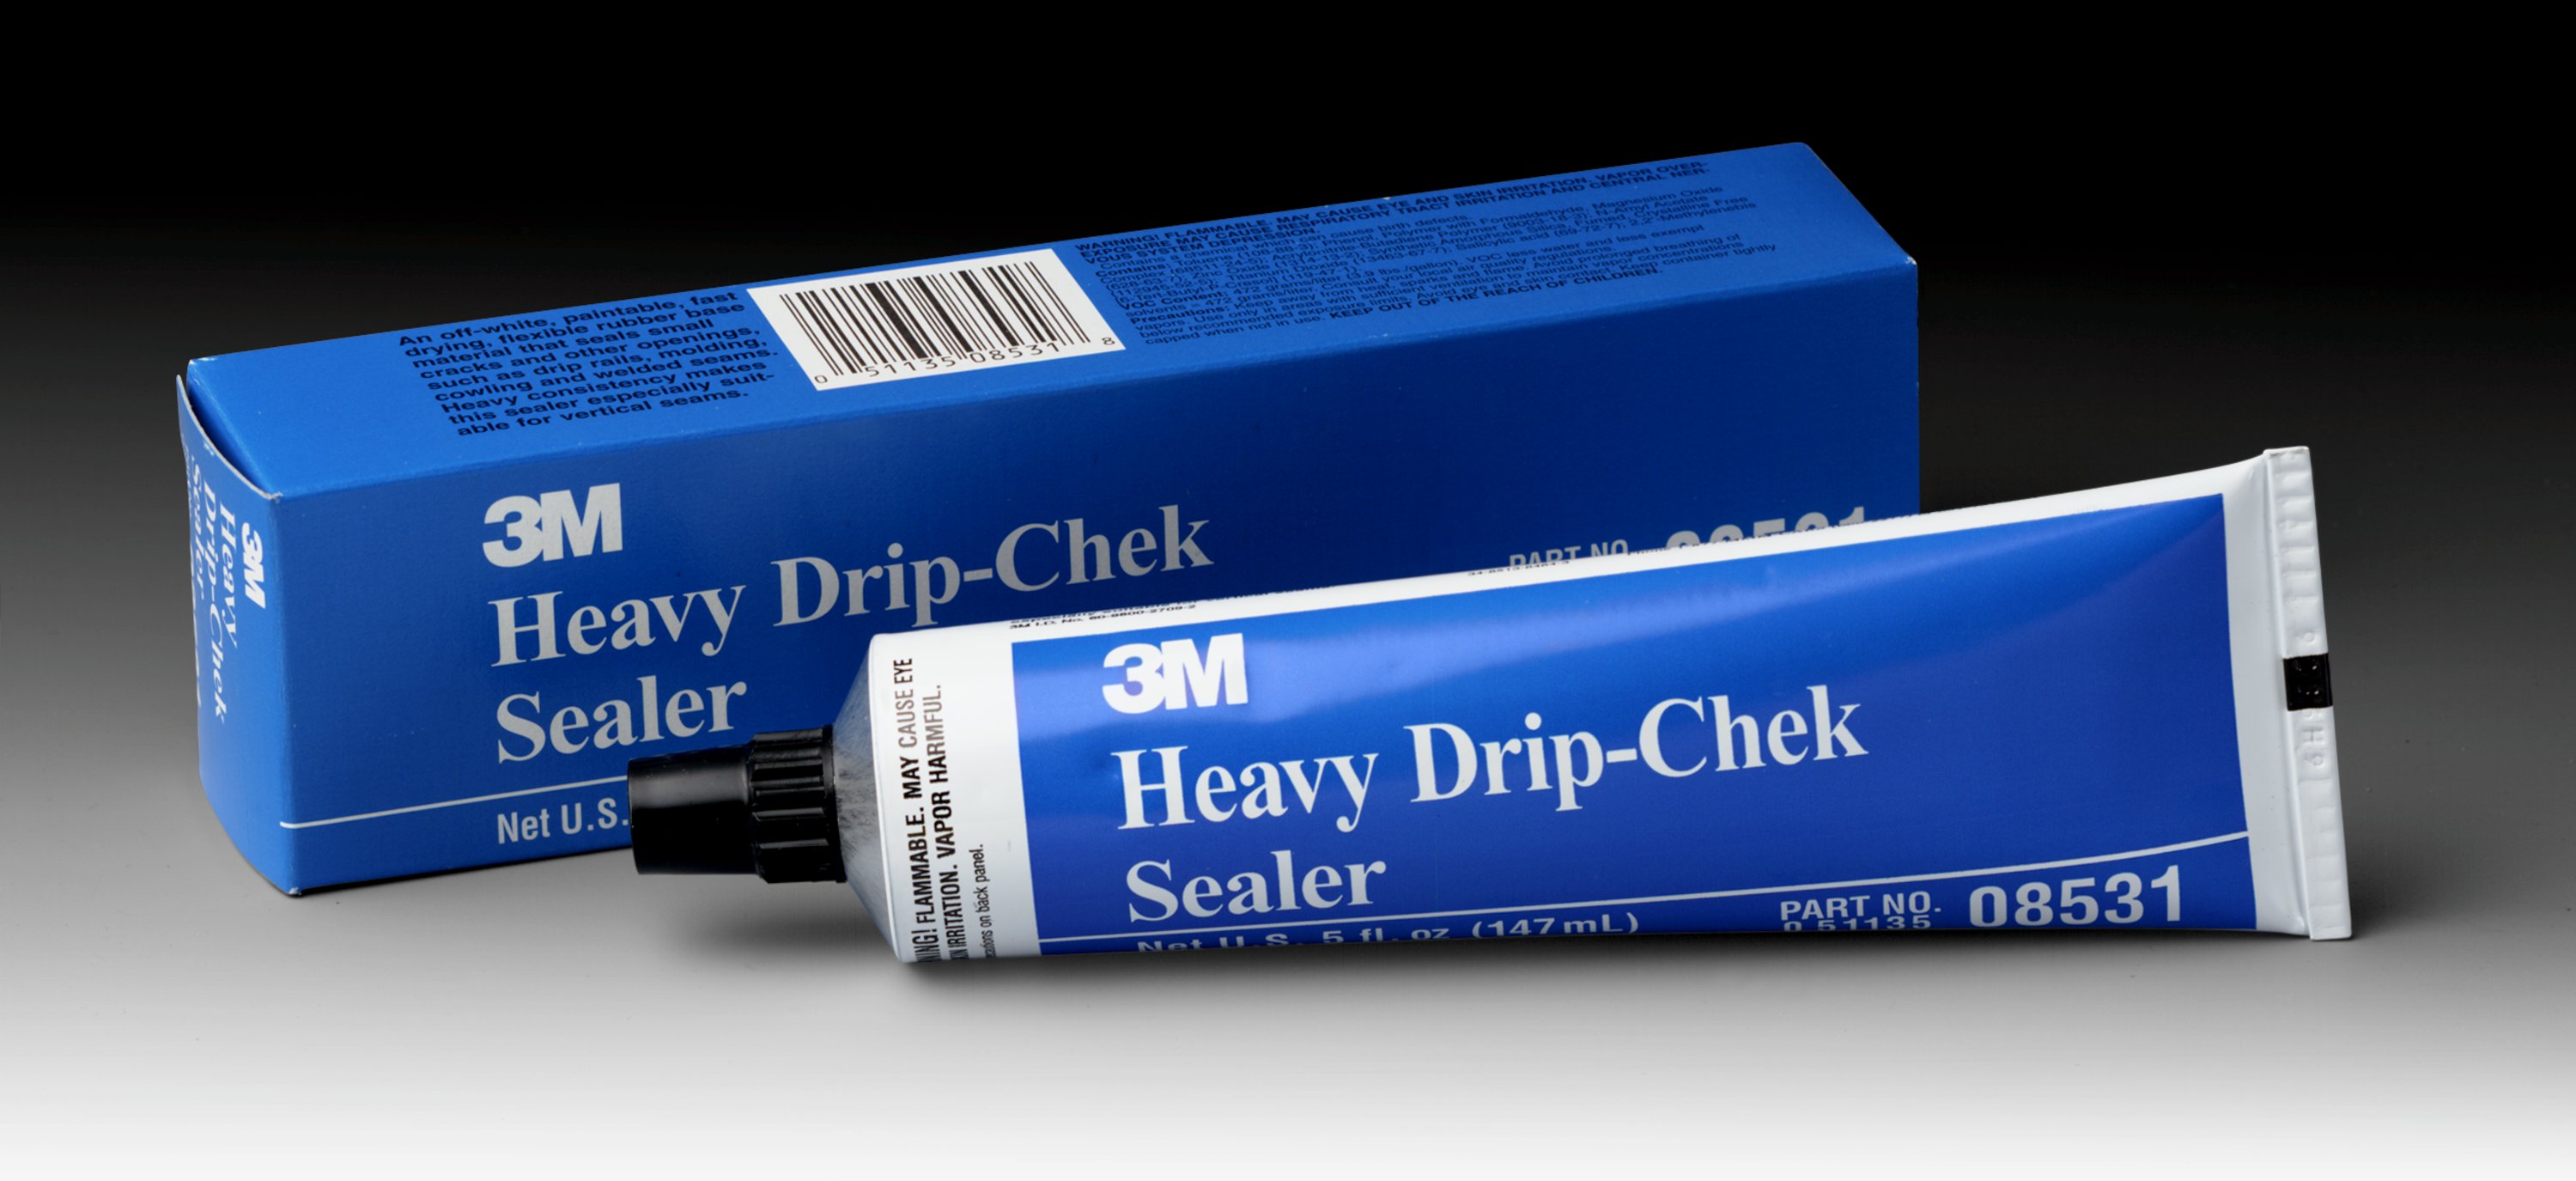 Designed specifically to seal exterior auto body definition seams such as roof drip rails and coach joints, 3M™ Heavy Drip-Chek™ Sealer features a non-sagging heavy-based formula combined with controlled shrinkage after application for airtight, UV-resistant seams.